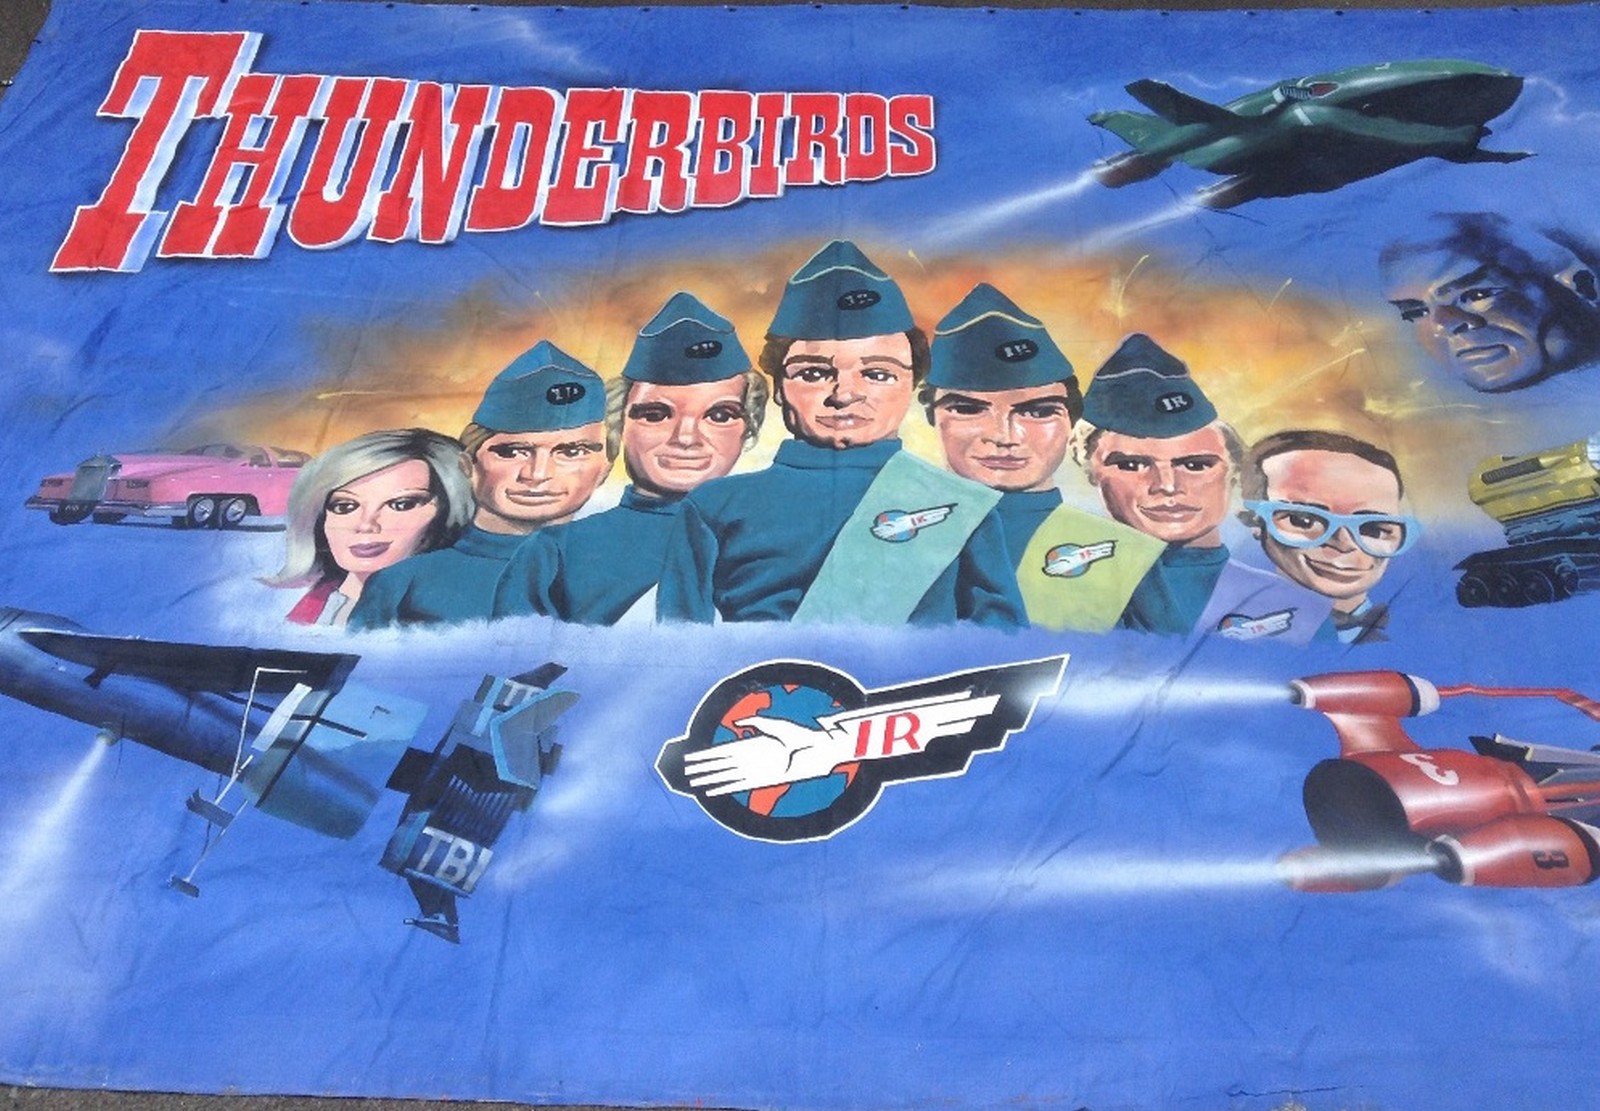 Thunderbirds - a large hand painted promotional advertising banner,